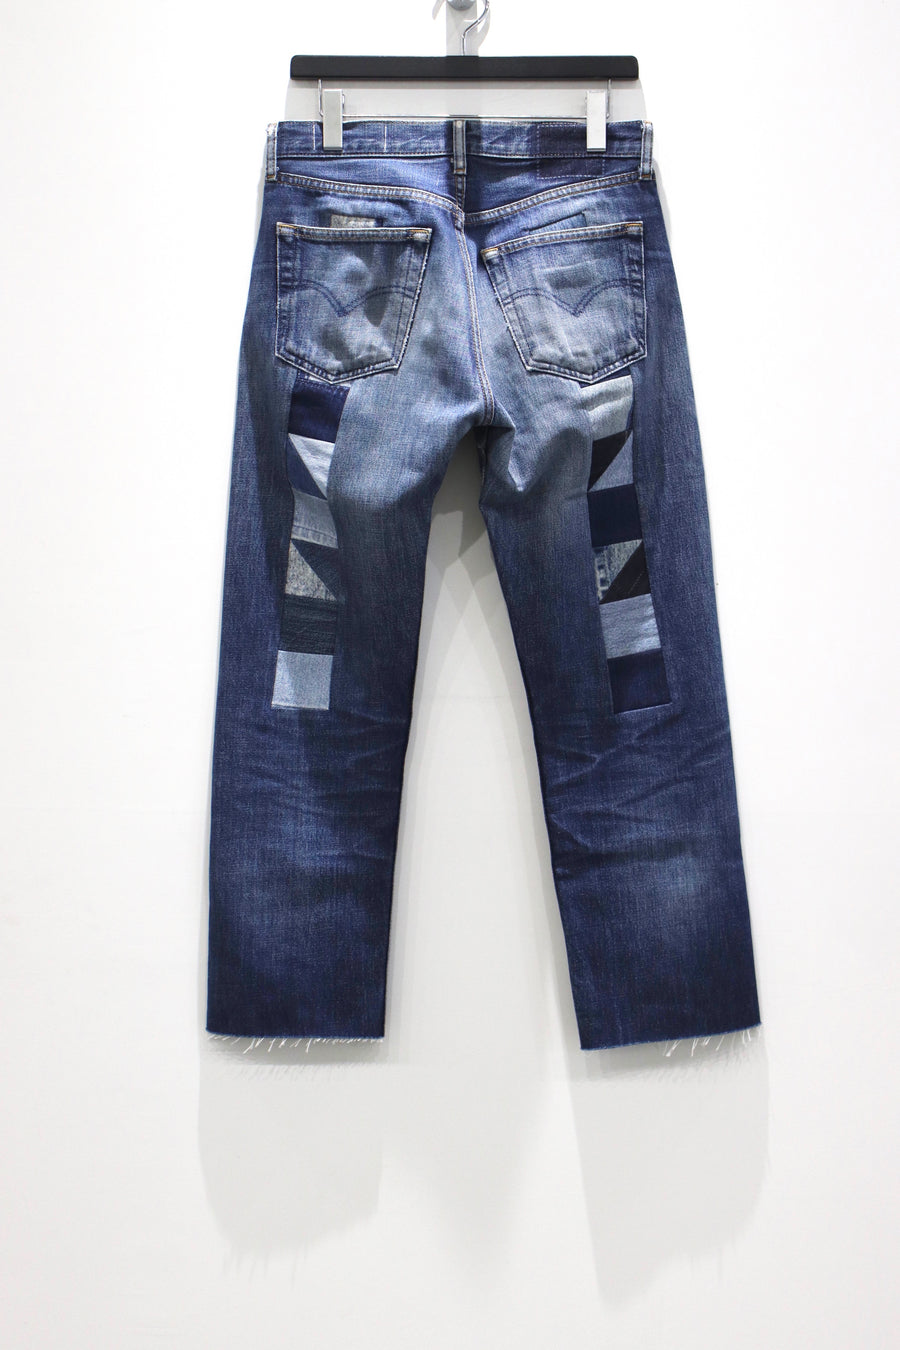 Children of the discordance  NY VINTAGE CUSTOMMADE PATCH DENIM B